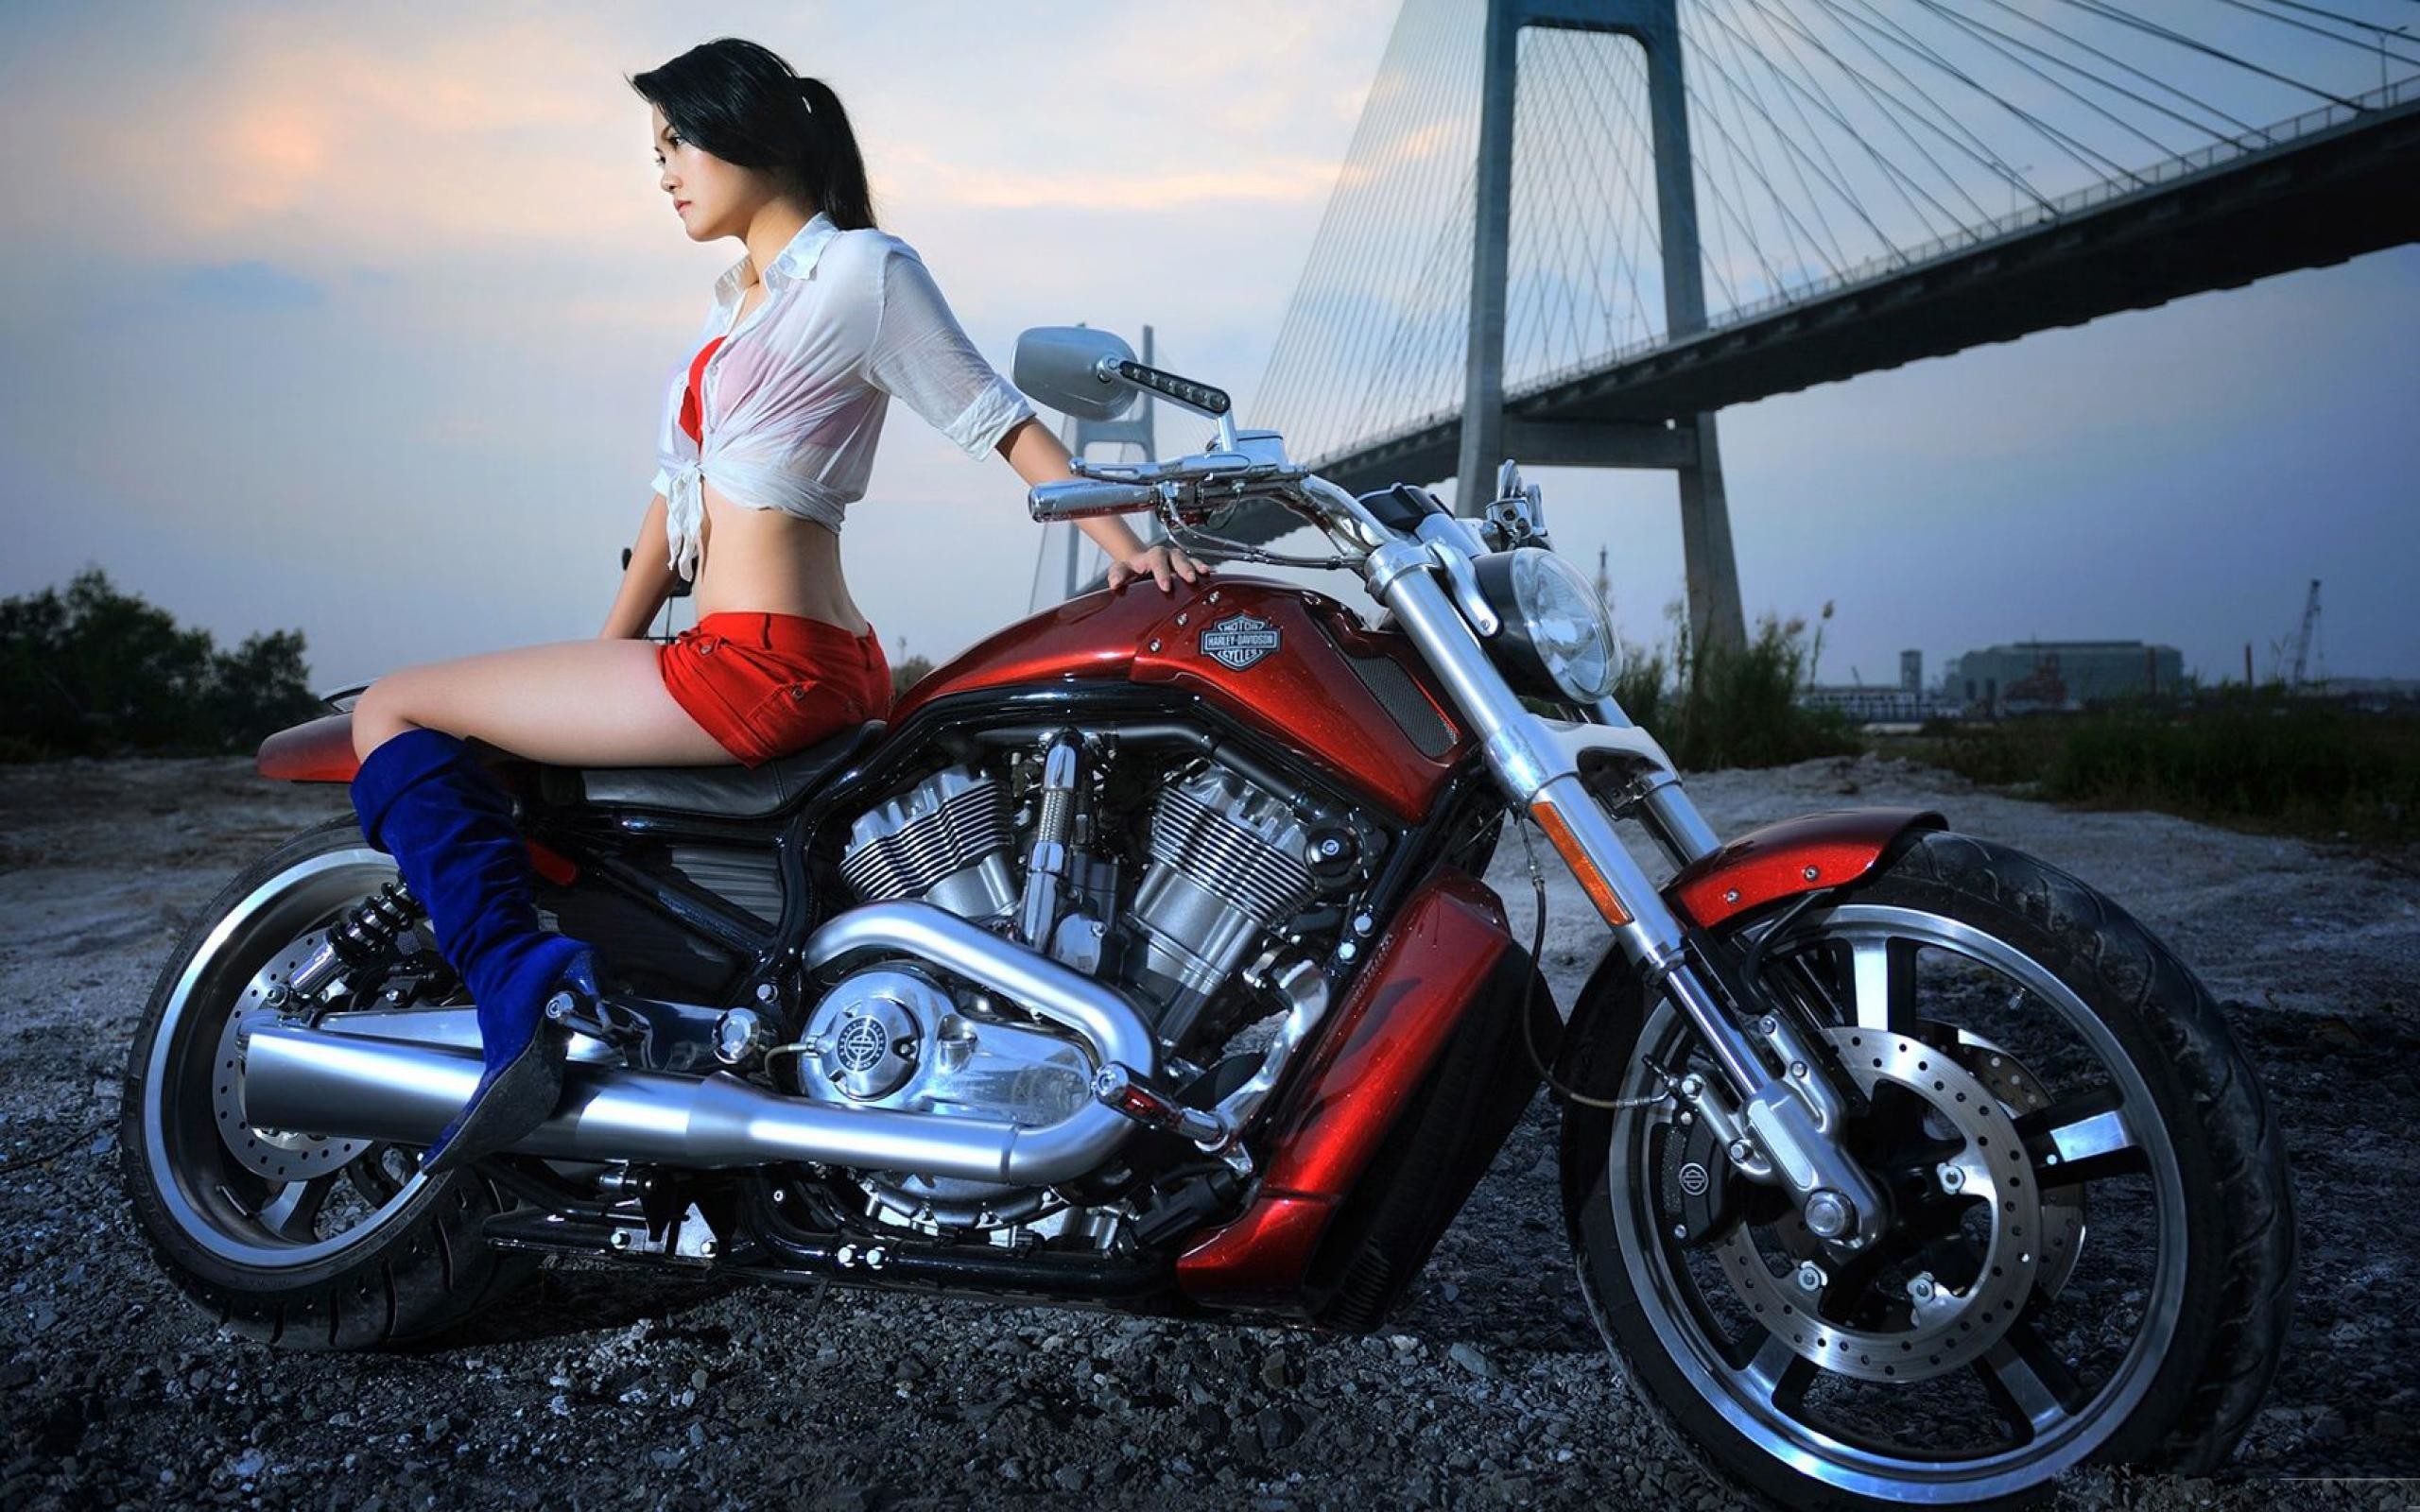 Hottest Harley Girls Download Wallpapers Sexy Girls Music Harley Davidson Motorcycles Best